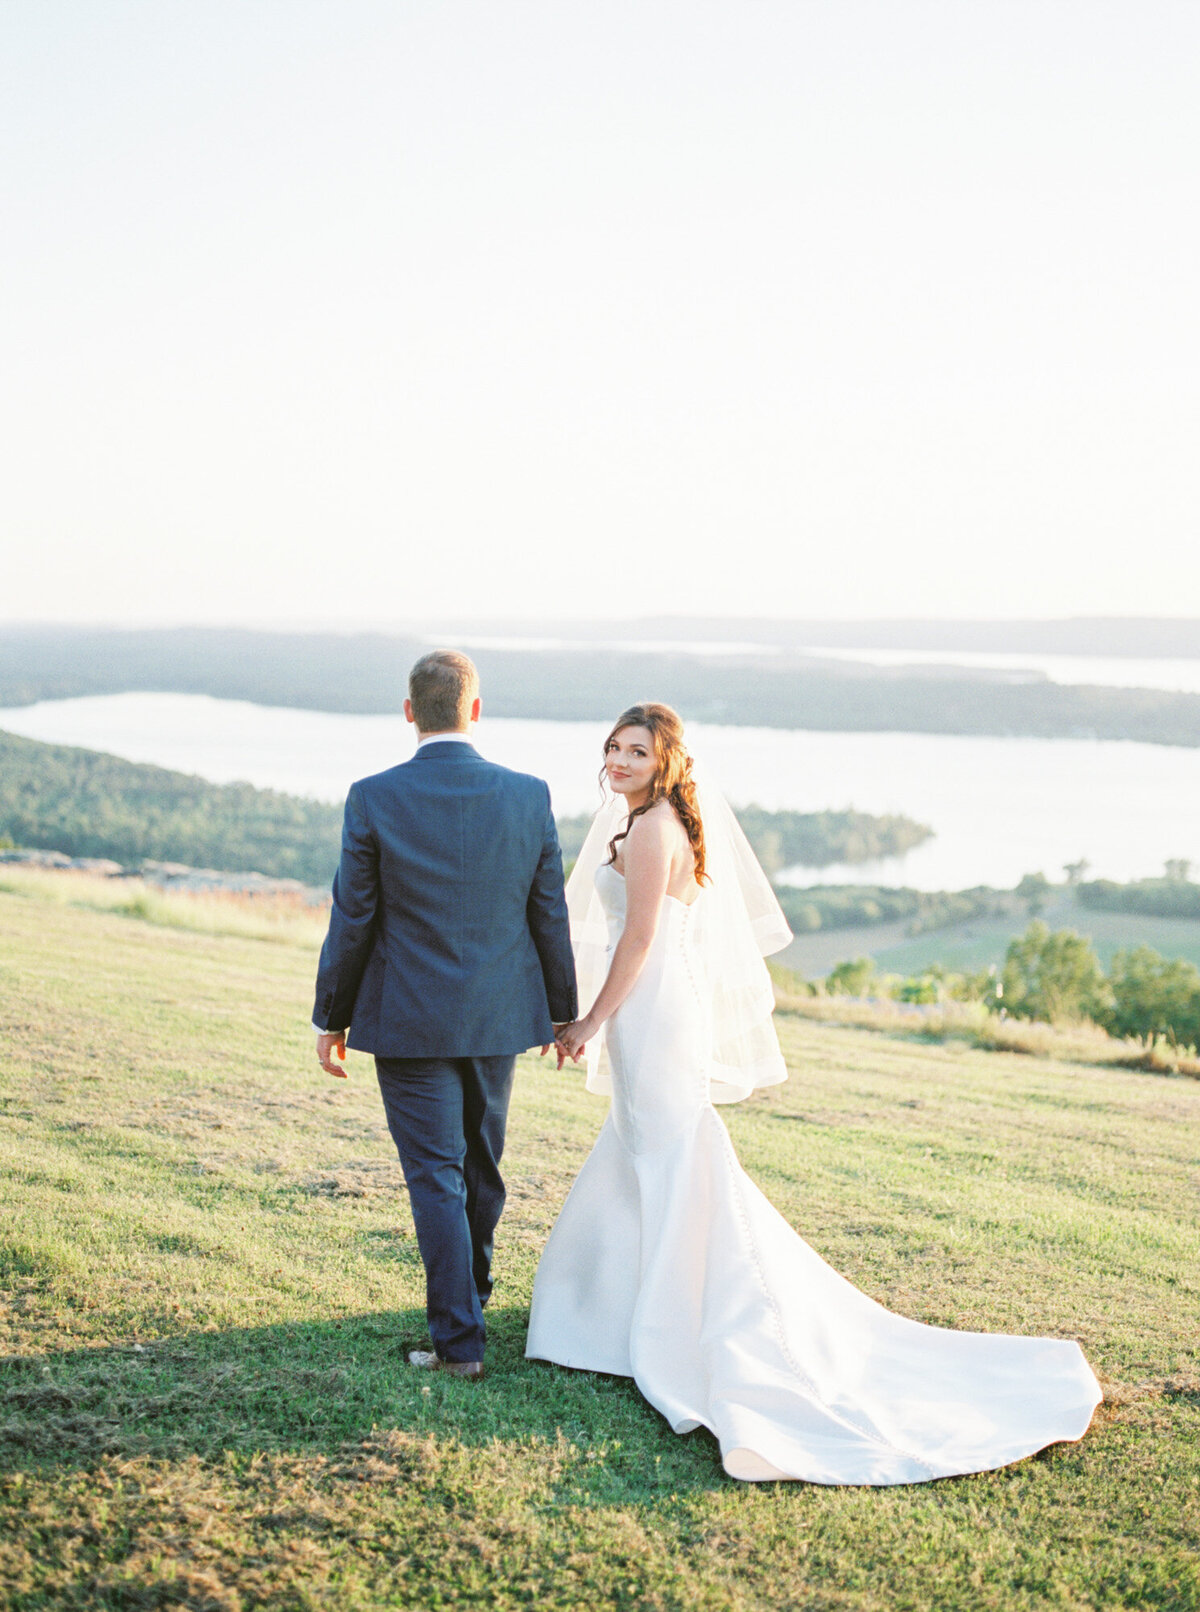 A bride looks back over her shoulder while walking with her groom toward the cliff overlooking a stunning landscape with a lake by Huntsville wedding photographer, Kelsey Dawn Photography